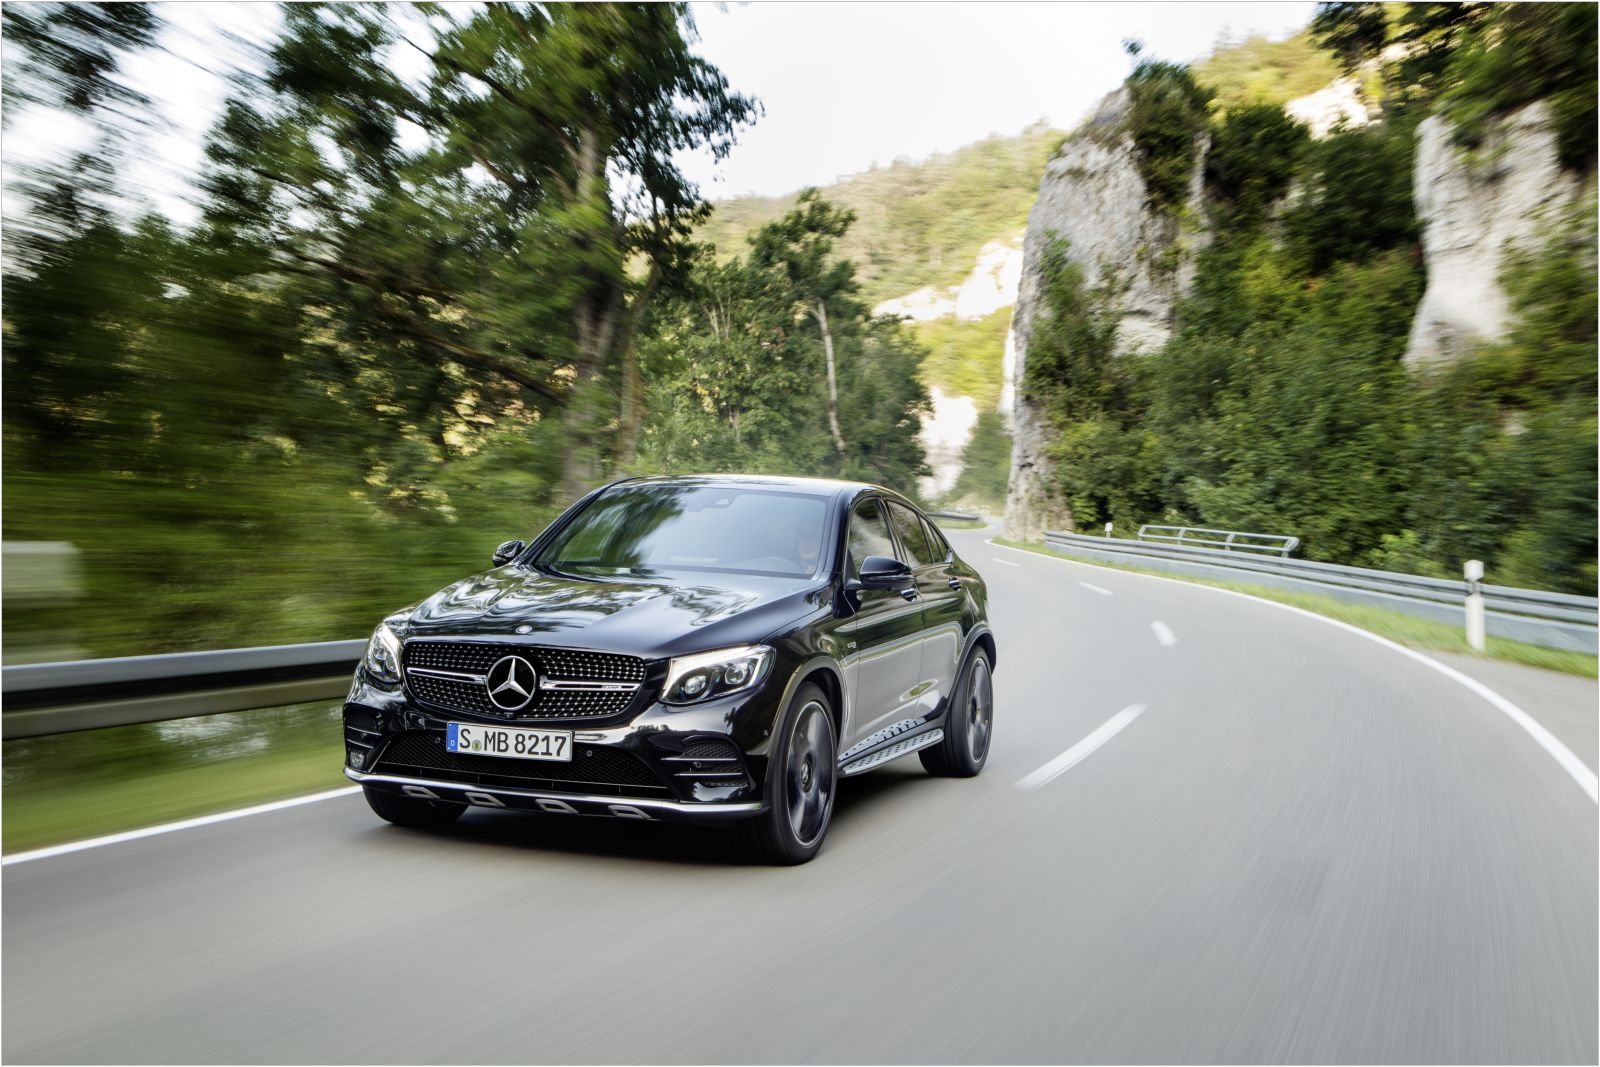 Mercedes-Benz GLC43 AMG 4Matic Coupe, 1600x1067px, img-4